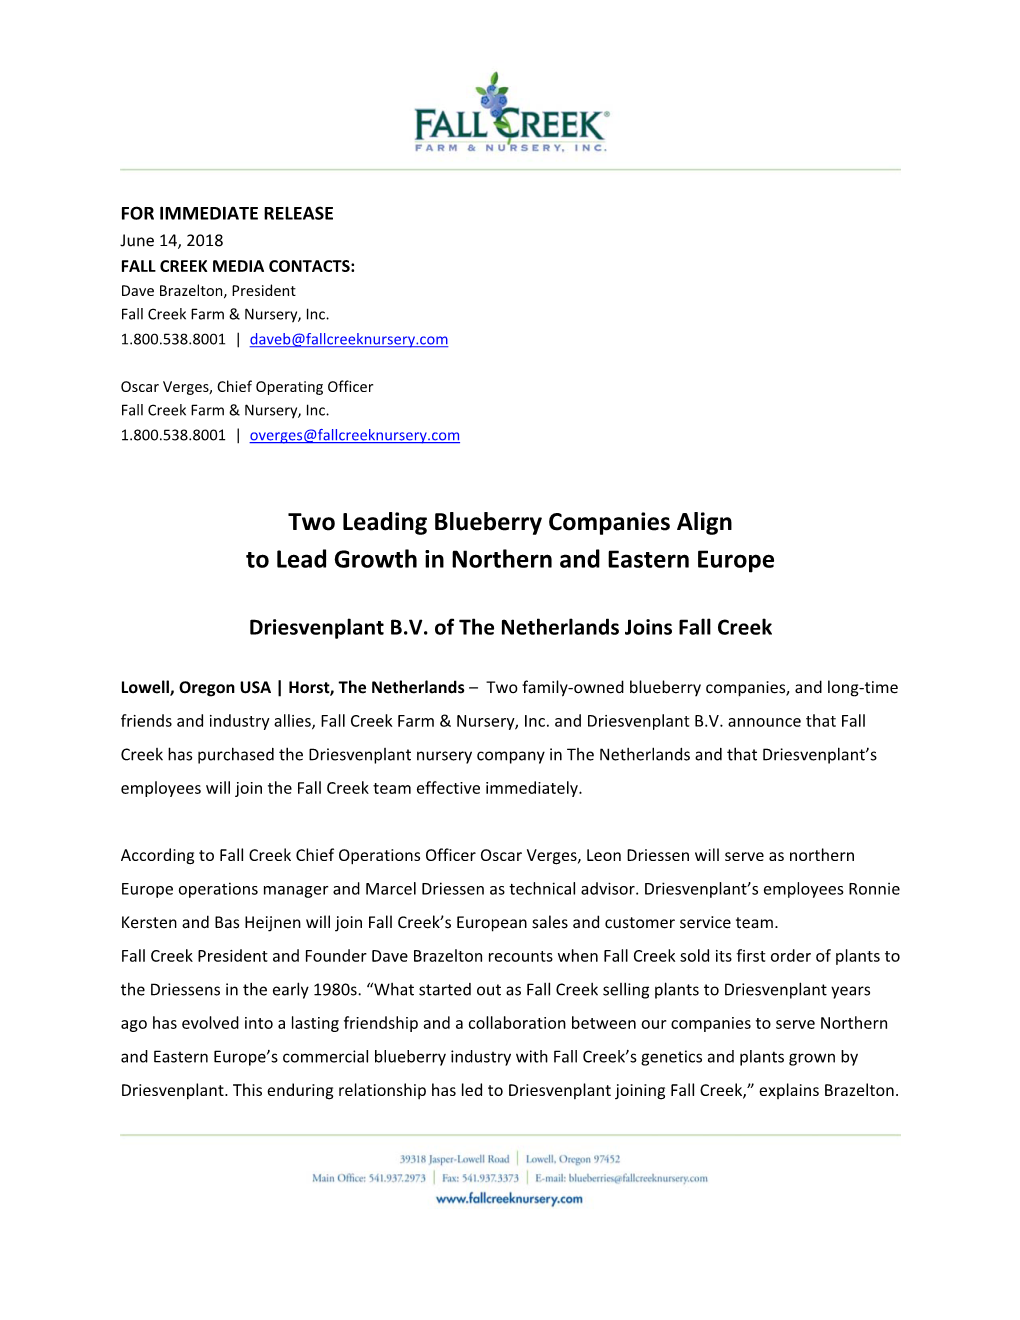 Two Leading Blueberry Companies Align to Lead Growth in Northern and Eastern Europe